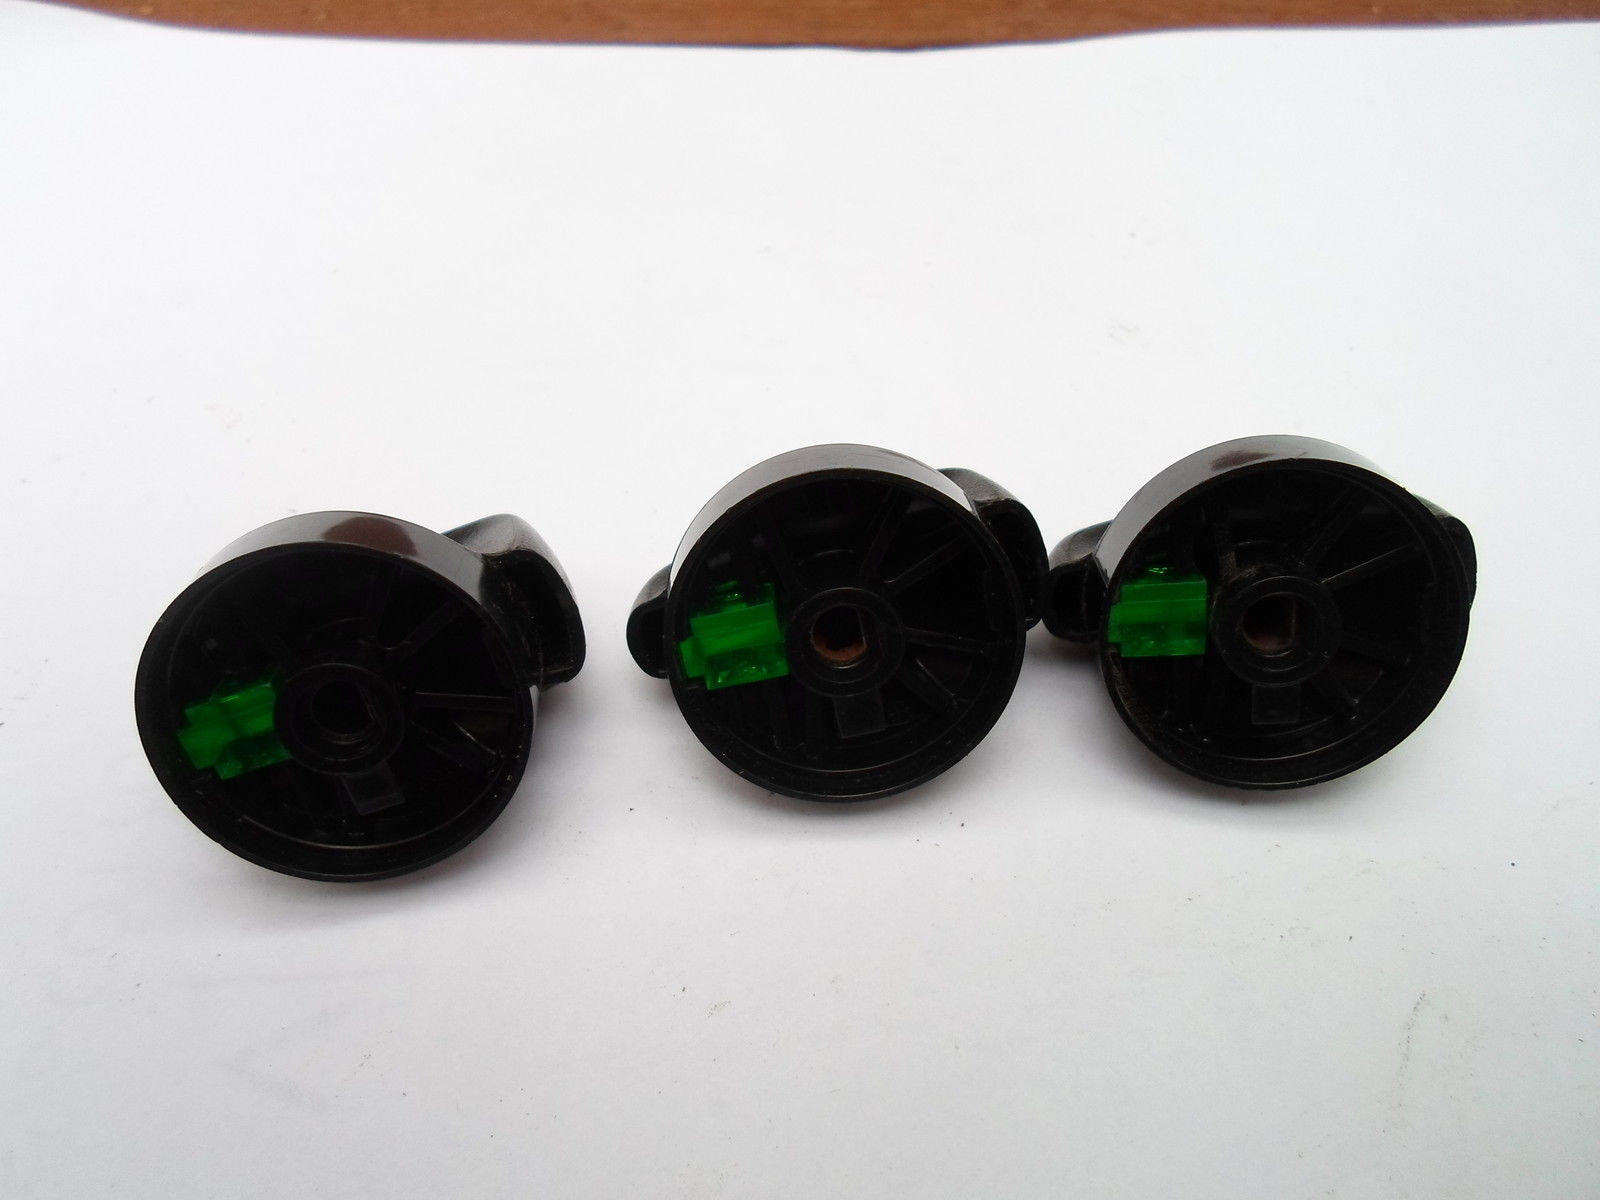 95 - 01 FORD EXPLORER GREEN CLIMATE CONTROL KNOB  SET OF 3 OEM FREE SHIPPING